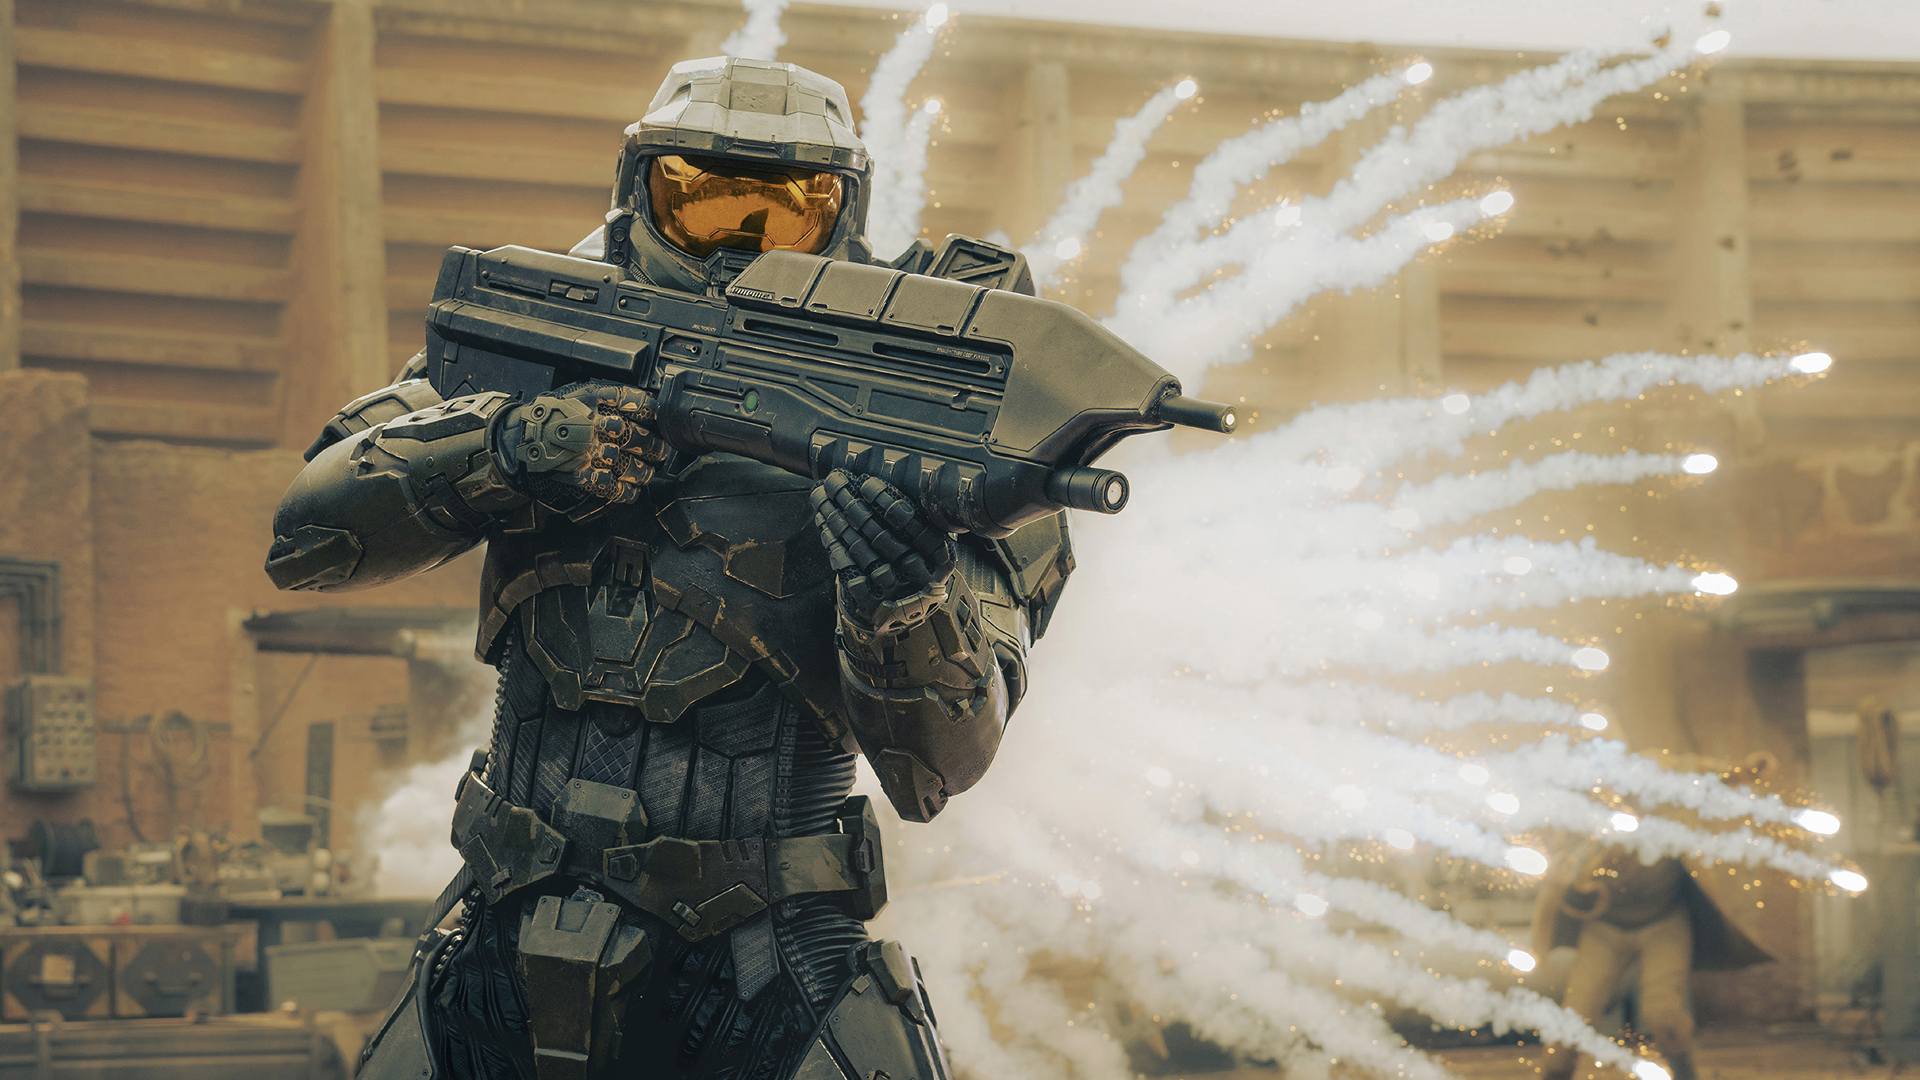 Master Chief fires his weapon during a battle in Paramount Plus' Halo TV series